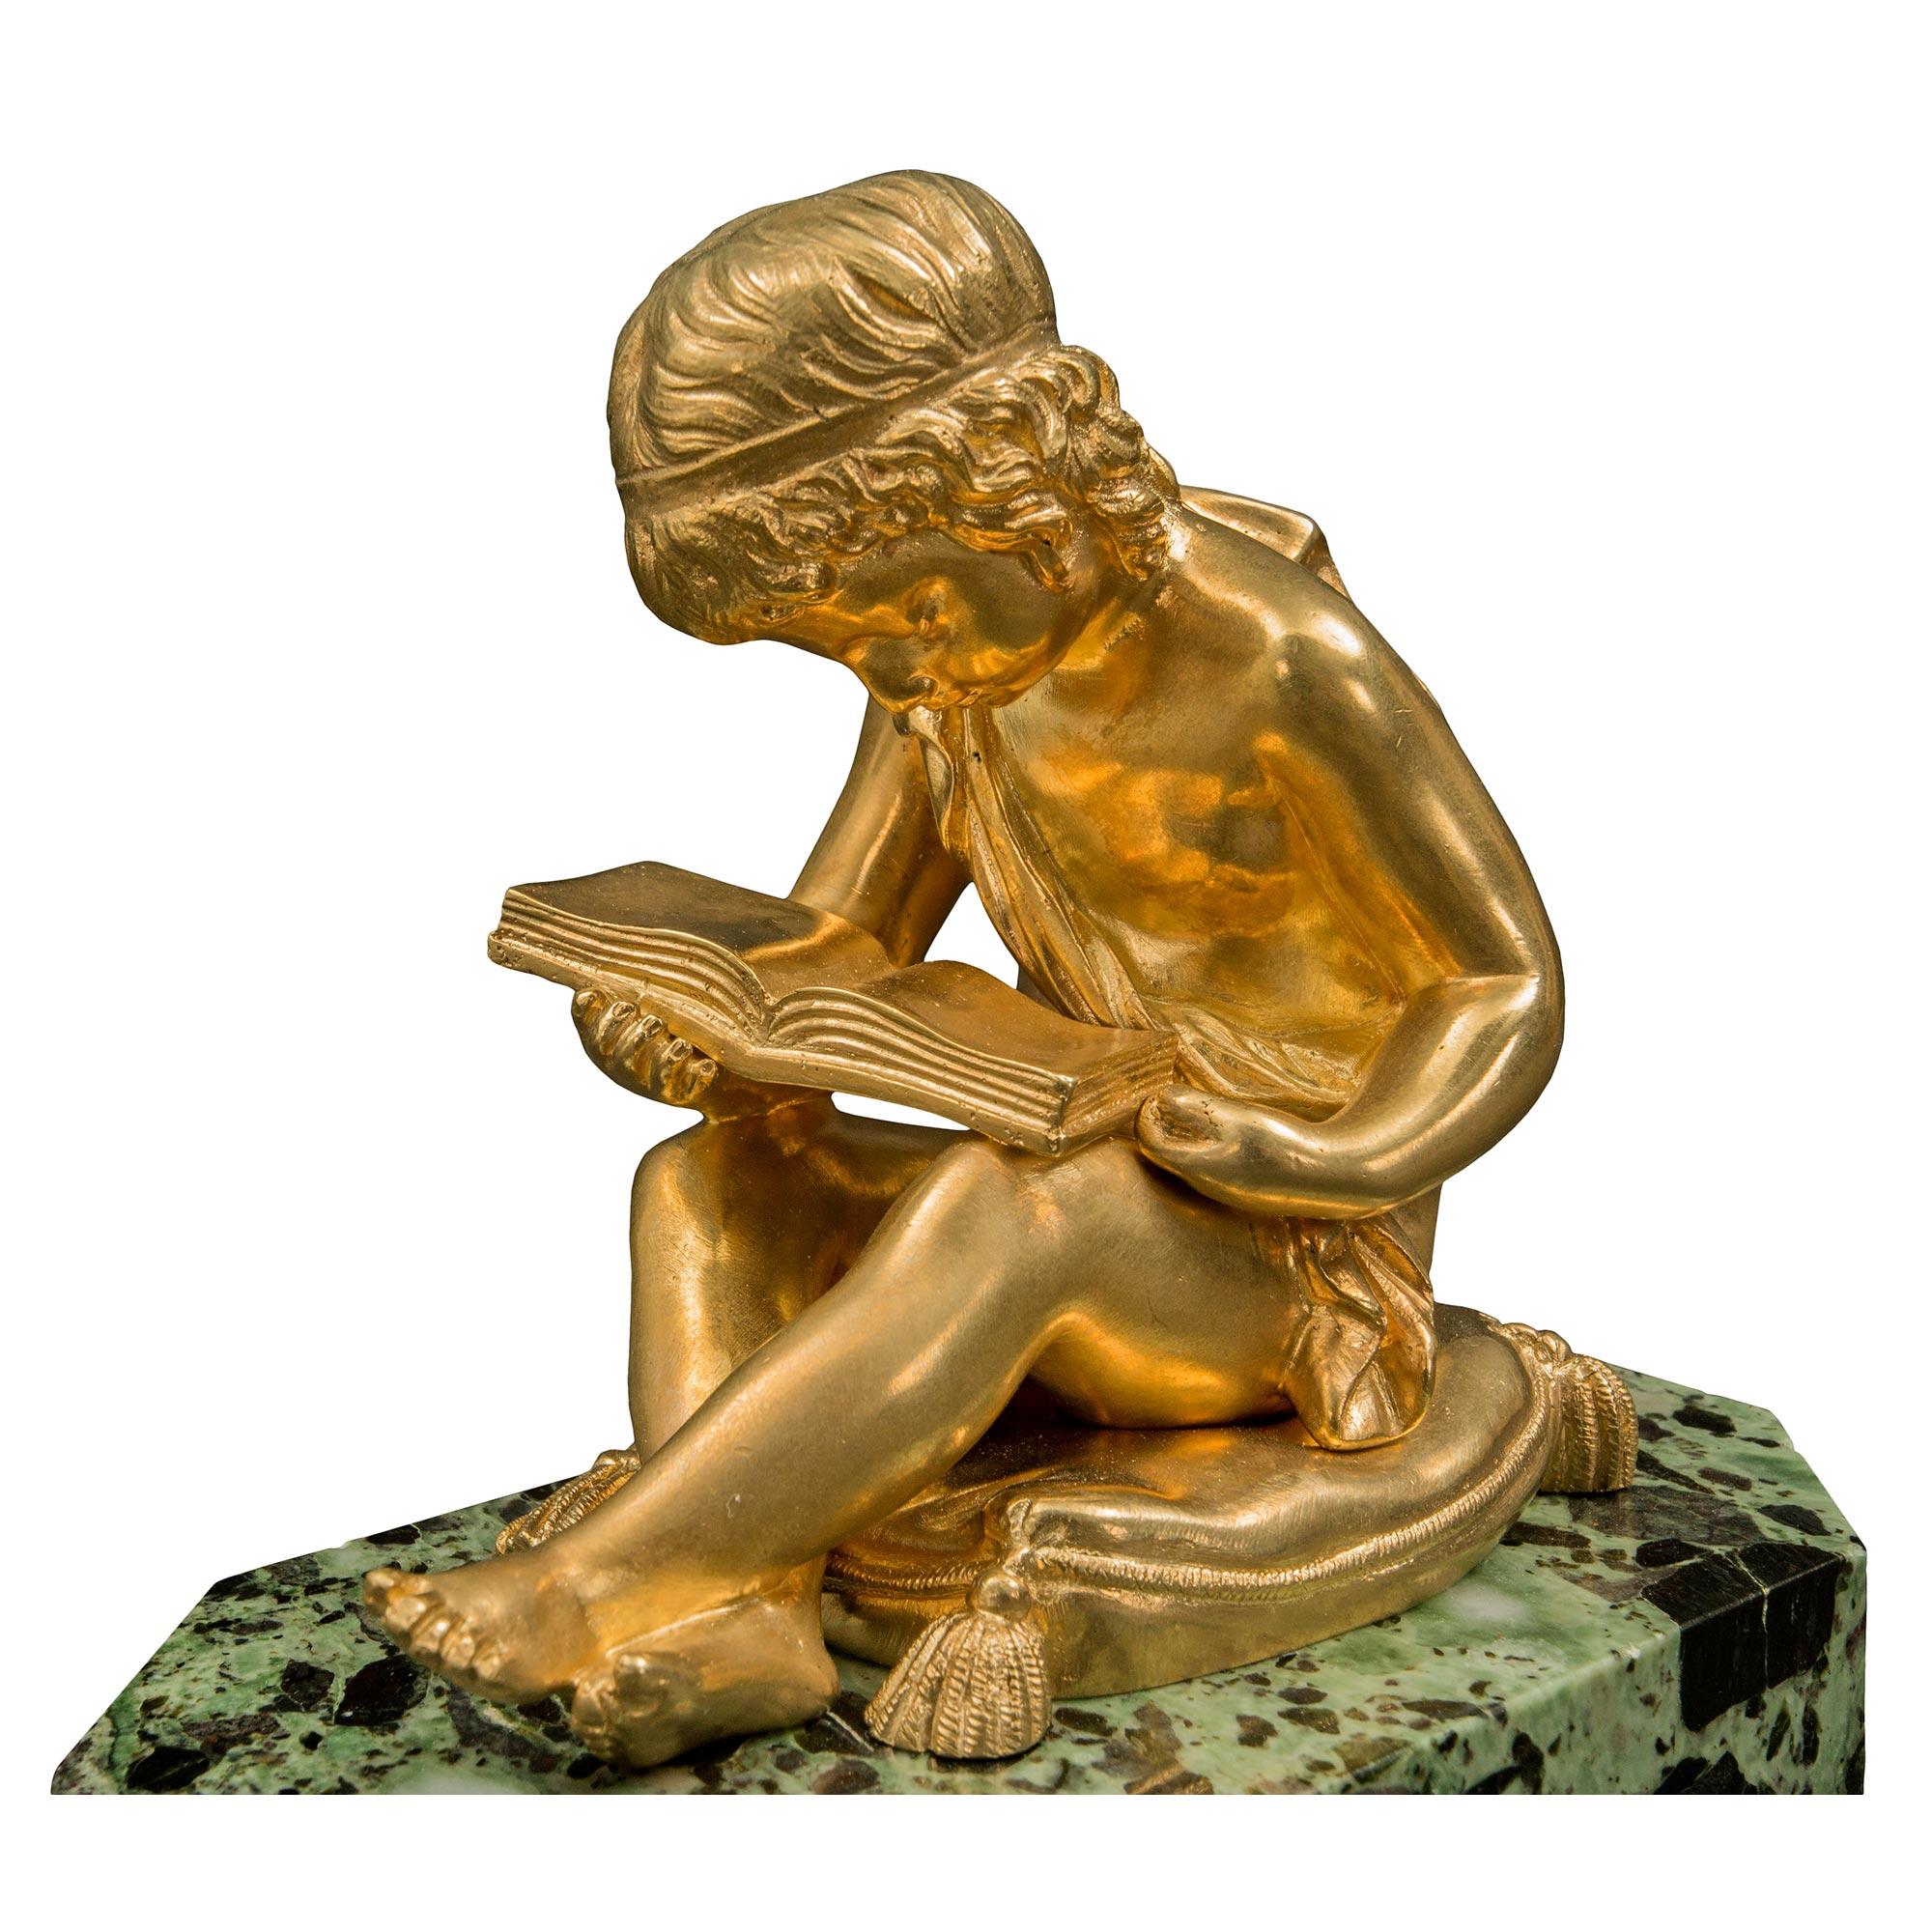 A most charming French 19th century Louis XVI st. ormolu and marble paper weight, signed and stamped. The decorative paper weight has a Vert Antique rectangular base with cut corners and a finely executed ormolu statue of a young boy. The boy is